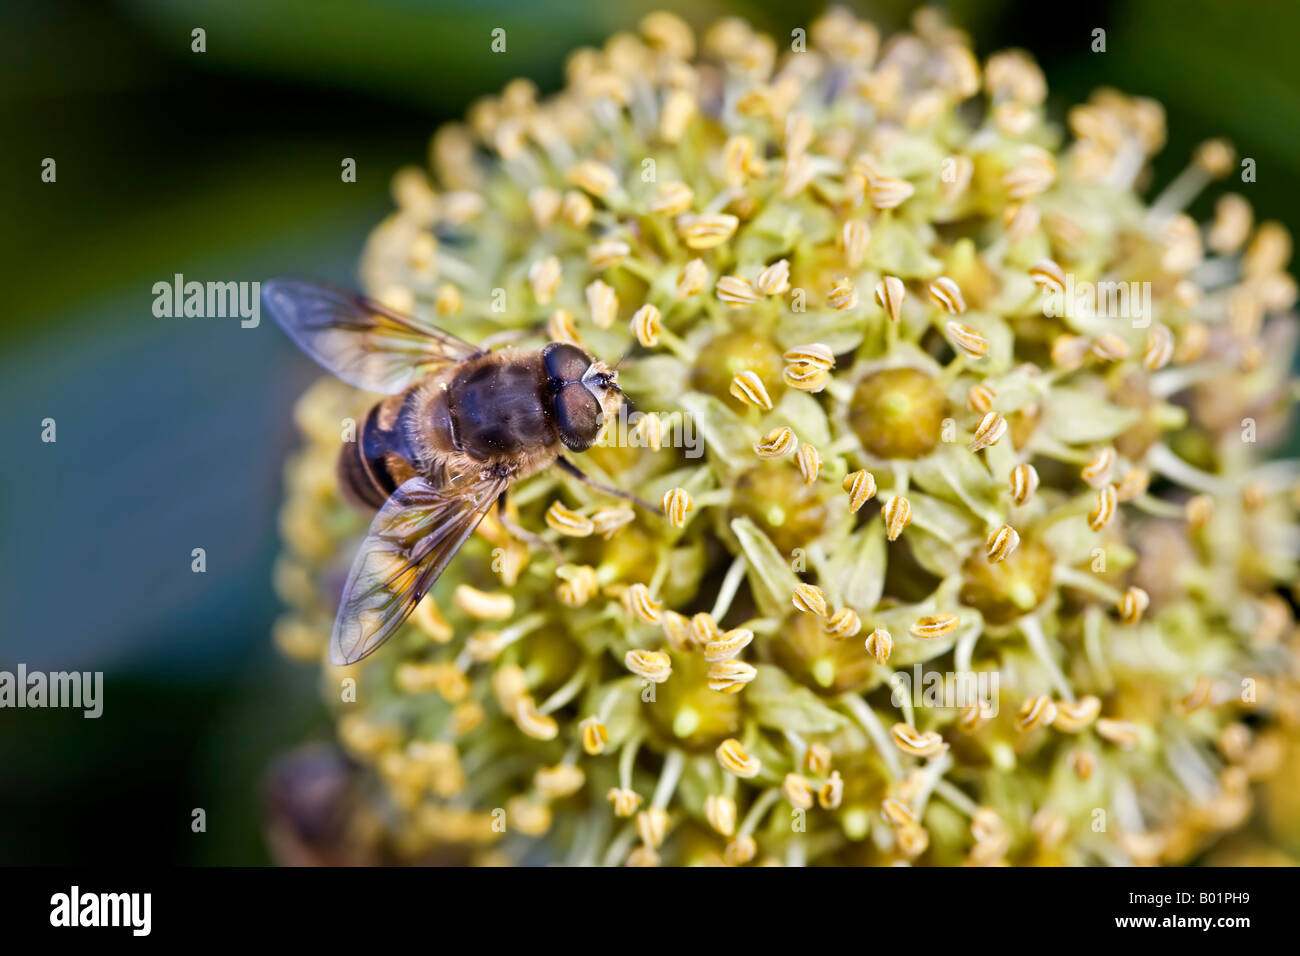 Hoverfly, Syrphid fly, on ivy flower November Stock Photo